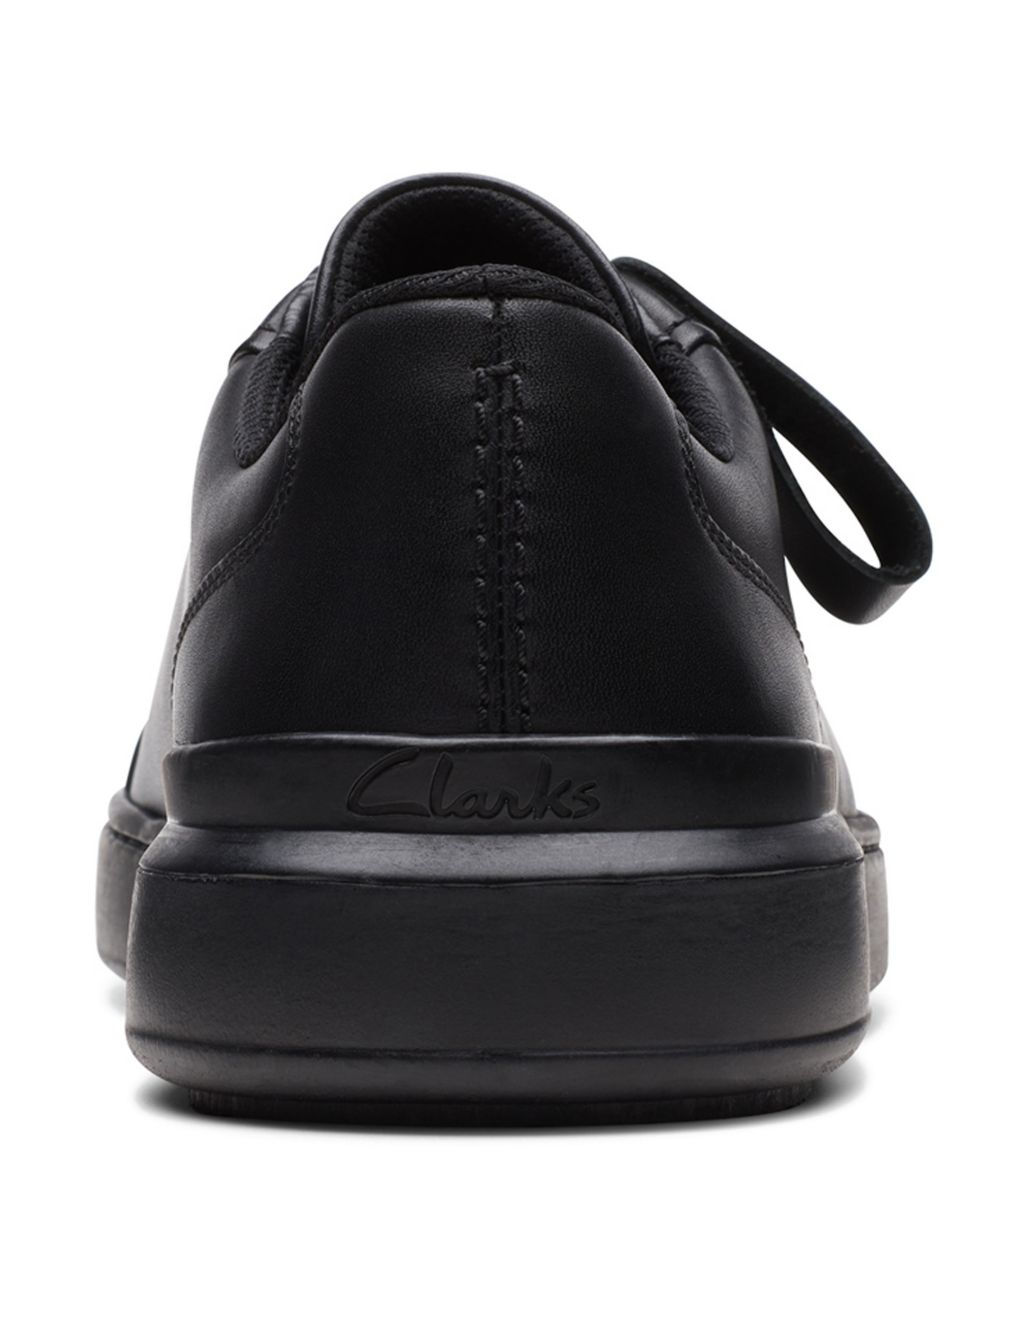 Wide Fit Leather Lace Up Trainers image 7